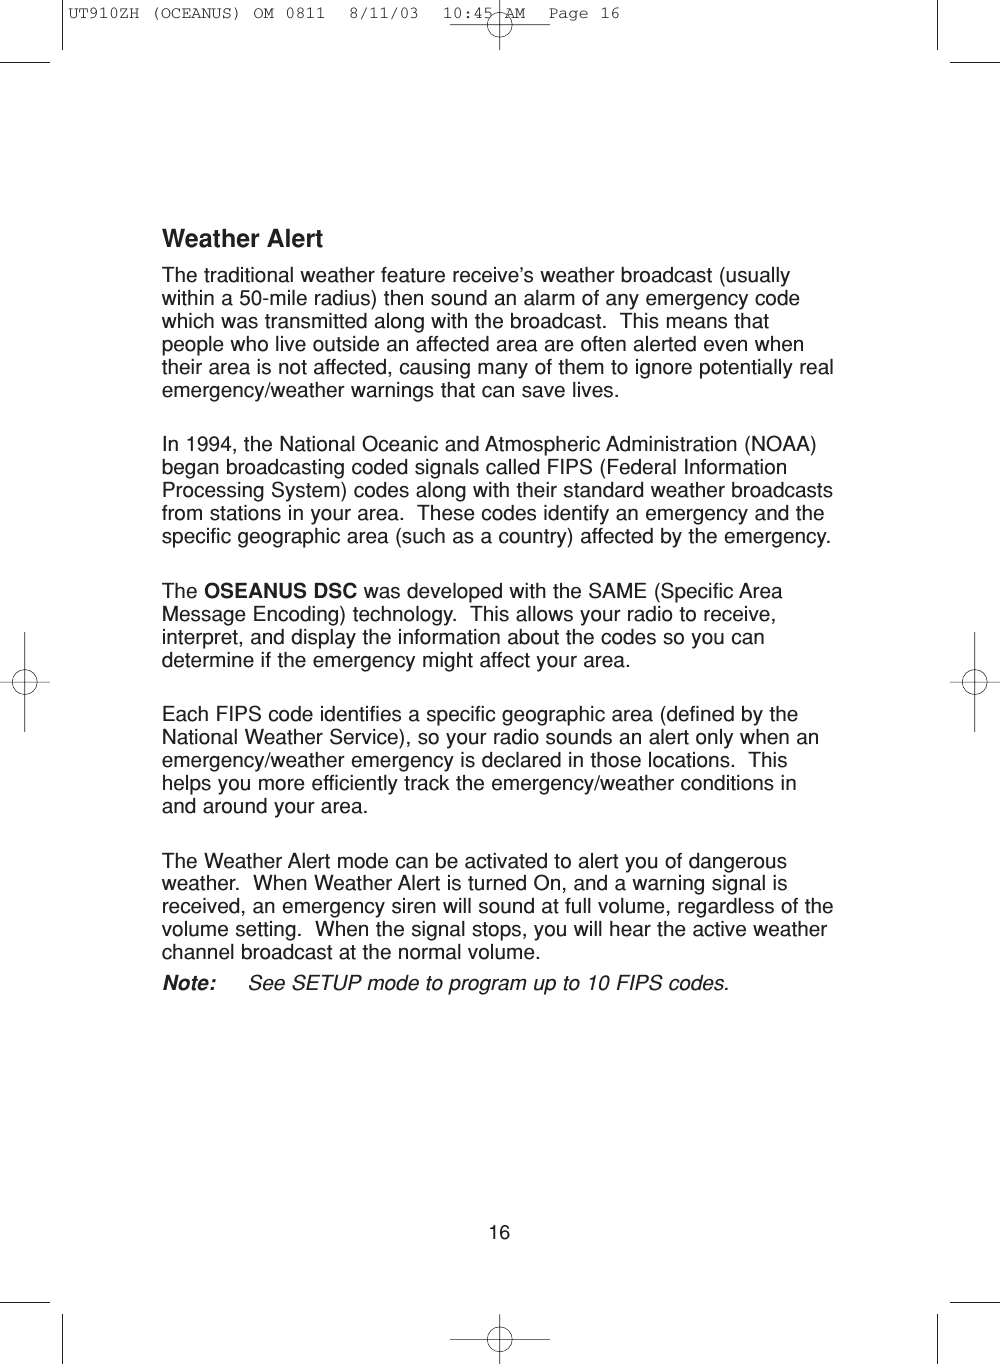 16Weather AlertThe traditional weather feature receive’s weather broadcast (usuallywithin a 50-mile radius) then sound an alarm of any emergency codewhich was transmitted along with the broadcast.  This means thatpeople who live outside an affected area are often alerted even whentheir area is not affected, causing many of them to ignore potentially realemergency/weather warnings that can save lives.In 1994, the National Oceanic and Atmospheric Administration (NOAA)began broadcasting coded signals called FIPS (Federal InformationProcessing System) codes along with their standard weather broadcastsfrom stations in your area.  These codes identify an emergency and thespecific geographic area (such as a country) affected by the emergency.The OSEANUS DSC was developed with the SAME (Specific AreaMessage Encoding) technology.  This allows your radio to receive,interpret, and display the information about the codes so you candetermine if the emergency might affect your area.Each FIPS code identifies a specific geographic area (defined by theNational Weather Service), so your radio sounds an alert only when anemergency/weather emergency is declared in those locations.  Thishelps you more efficiently track the emergency/weather conditions inand around your area.The Weather Alert mode can be activated to alert you of dangerousweather.  When Weather Alert is turned On, and a warning signal isreceived, an emergency siren will sound at full volume, regardless of thevolume setting.  When the signal stops, you will hear the active weatherchannel broadcast at the normal volume.Note: See SETUP mode to program up to 10 FIPS codes.UT910ZH (OCEANUS) OM 0811  8/11/03  10:45 AM  Page 16